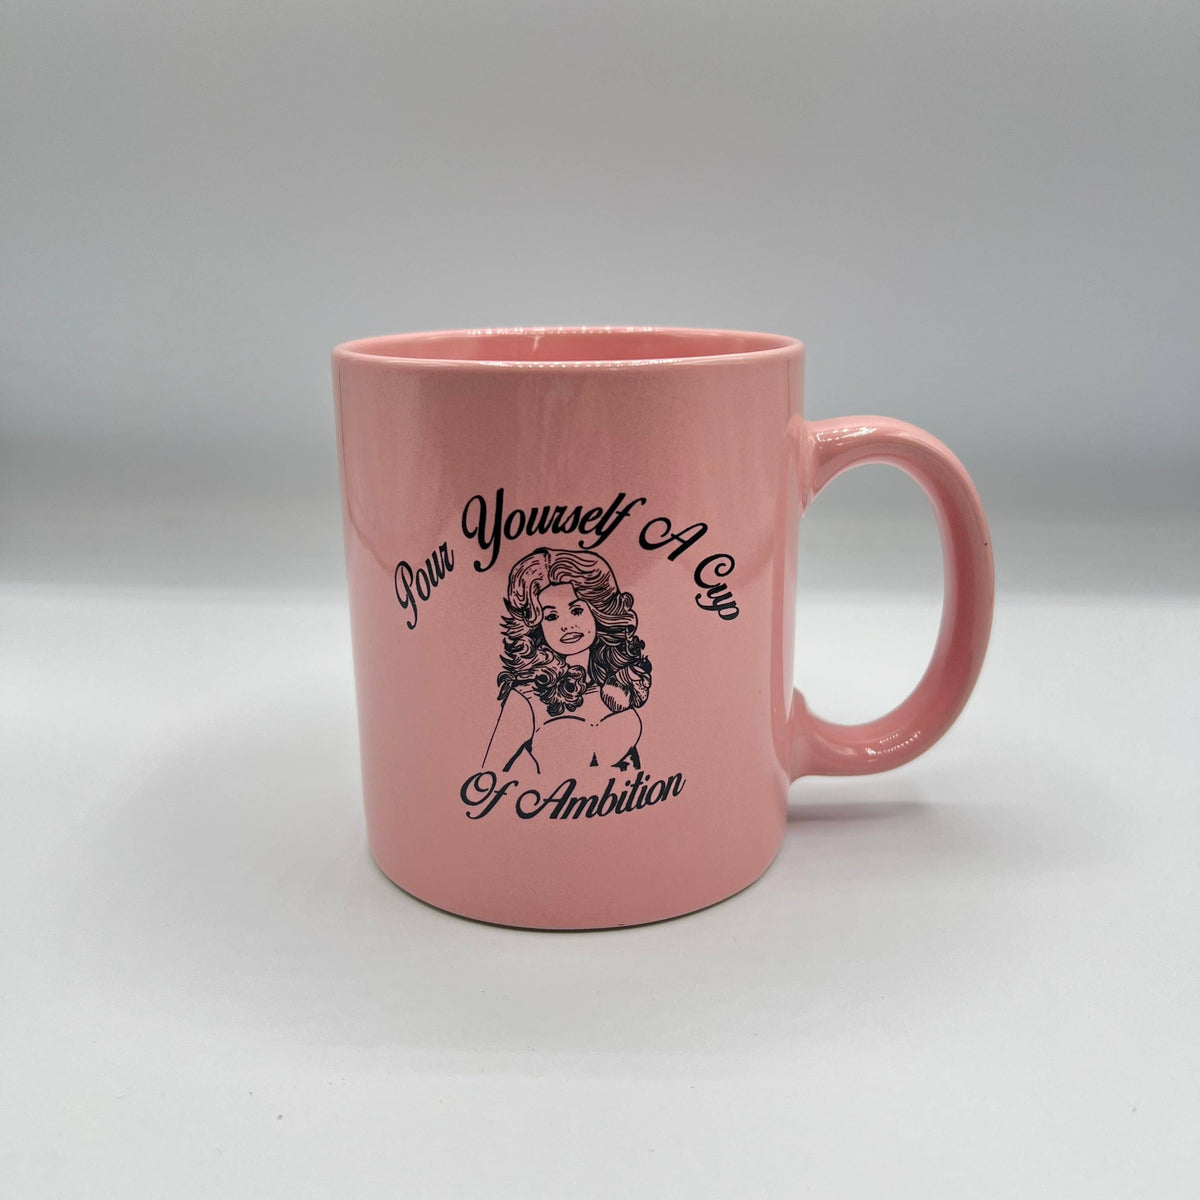 Pour Yourself A Cup of Ambition Mug